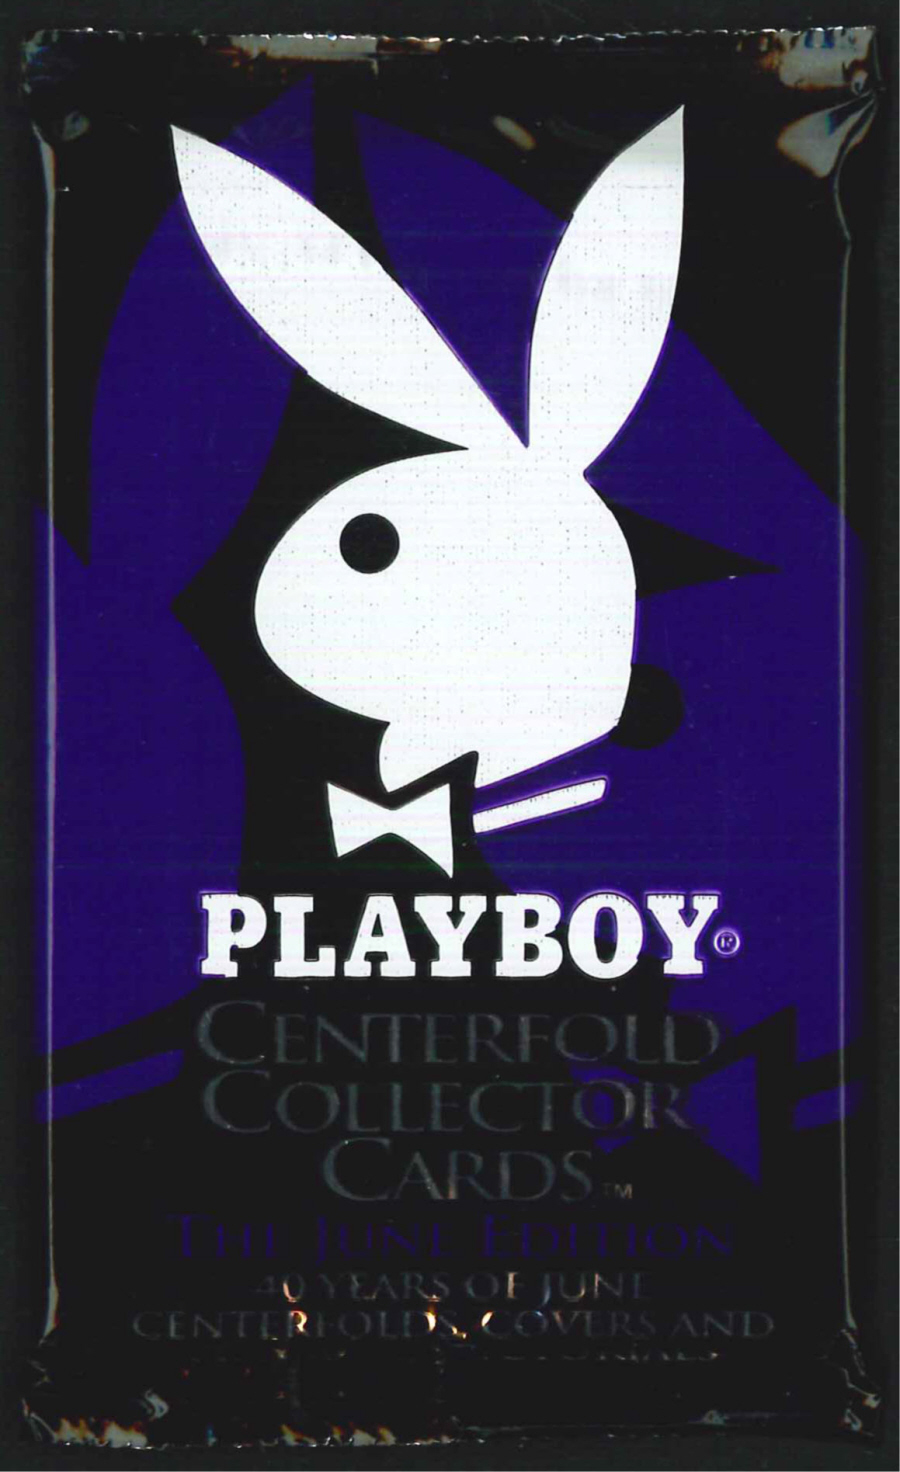 "Playboy Centrefold Collectors Cards - The June Edition" Trading Card pack, by Sports Time, Inc